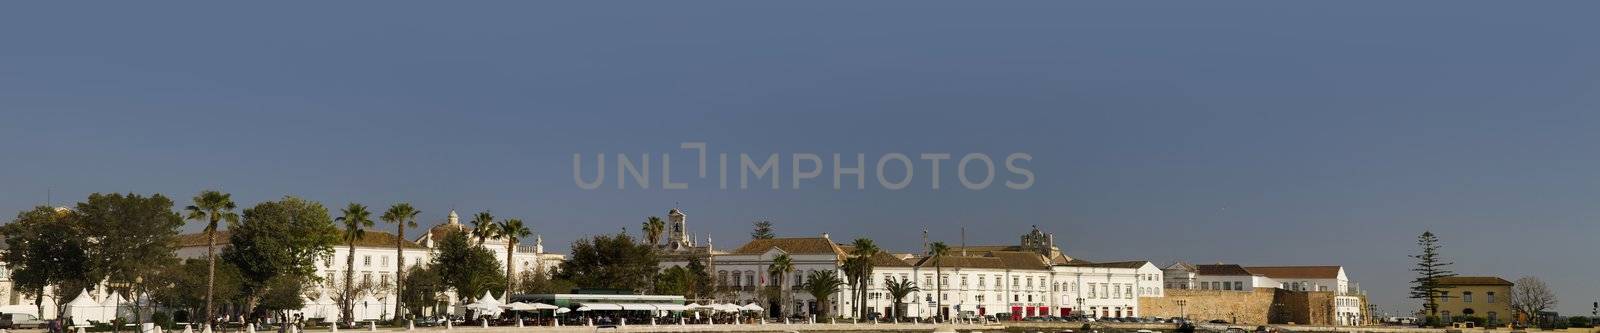 View of part of the tourist area in the city of Faro, Portugal.